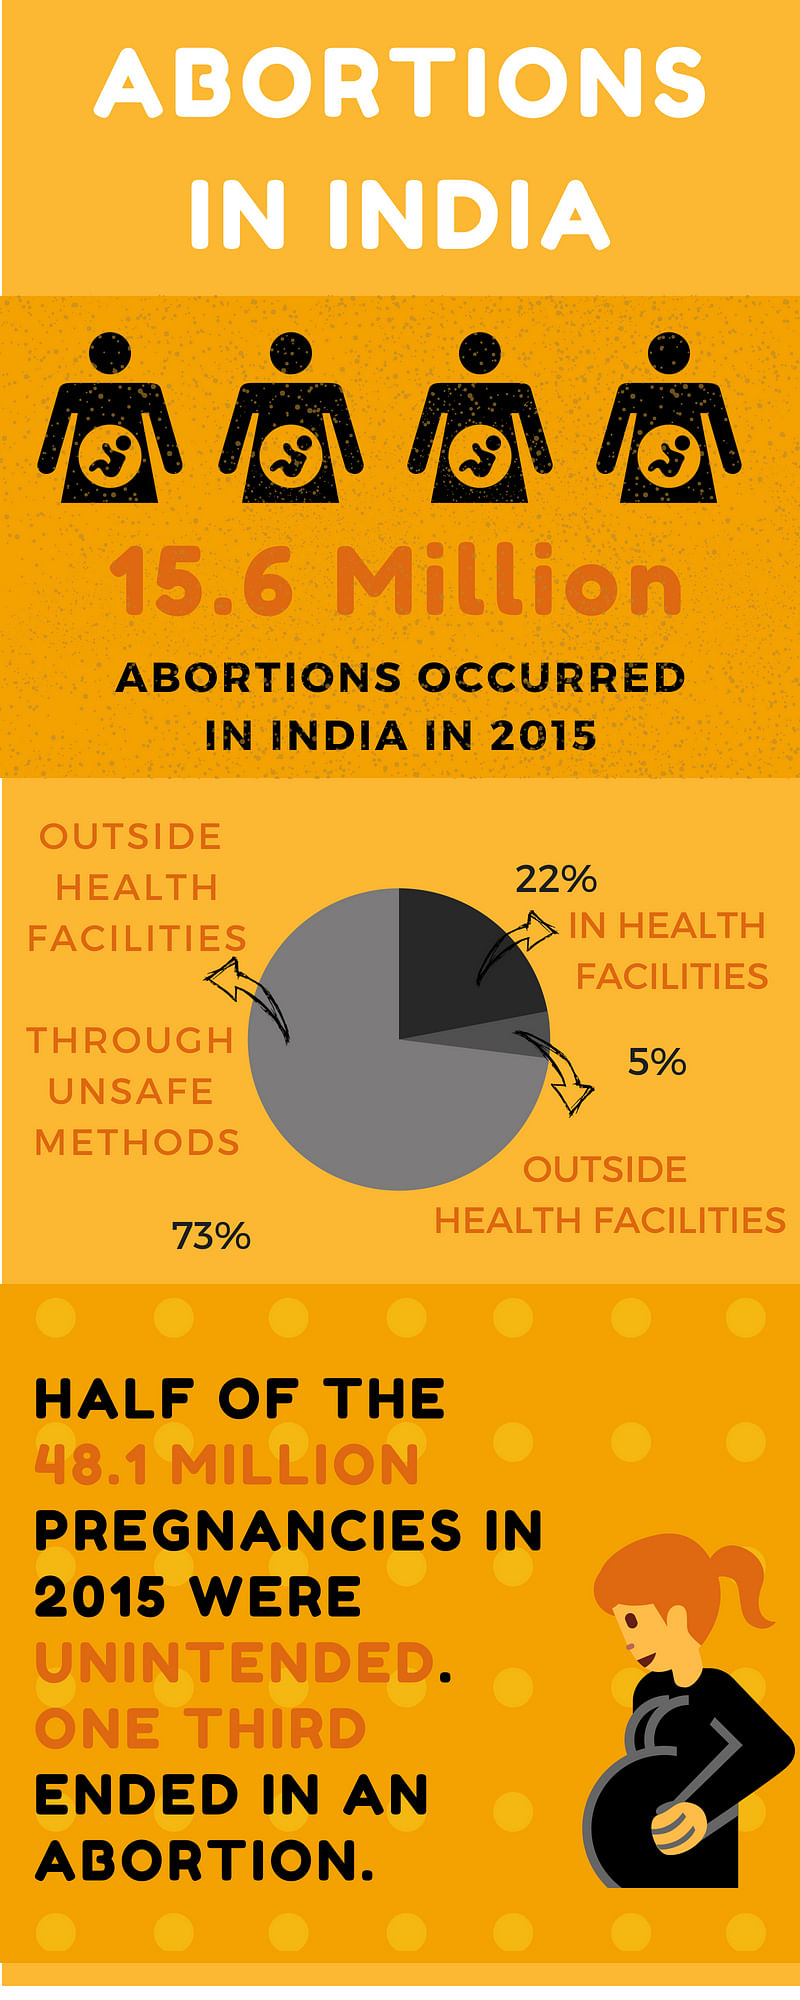  MTP Act: Do women in India have safe access to abortion?